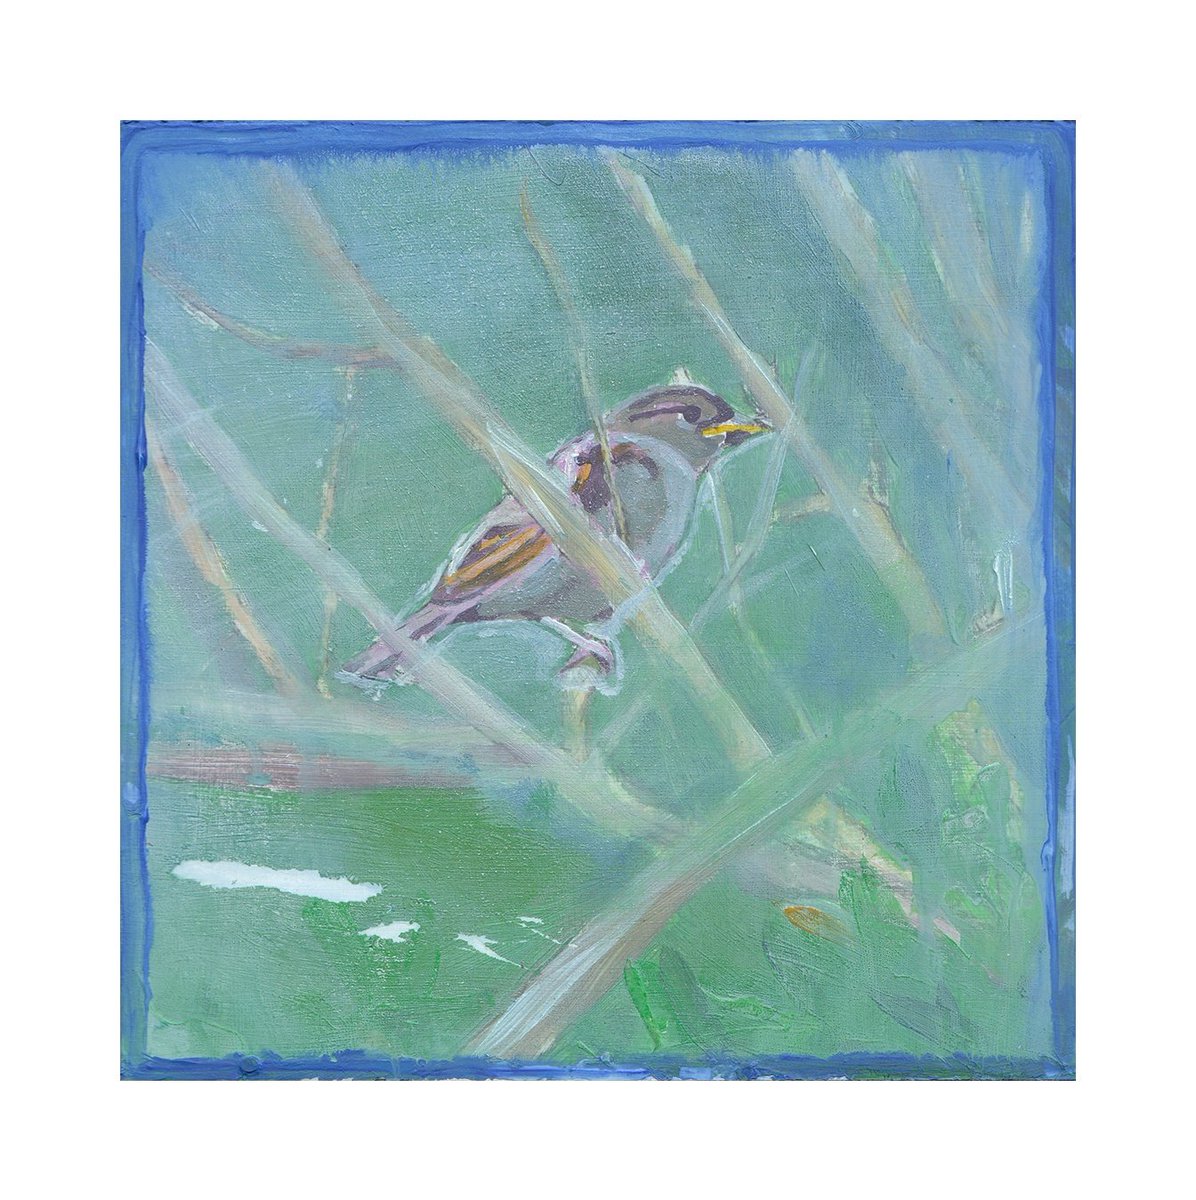 House Sparrow, 8x8in, acrylic on panel. Available to purchase from my online shop.

#housesparrow #art #irishart #irishbirds #acrylicpainting